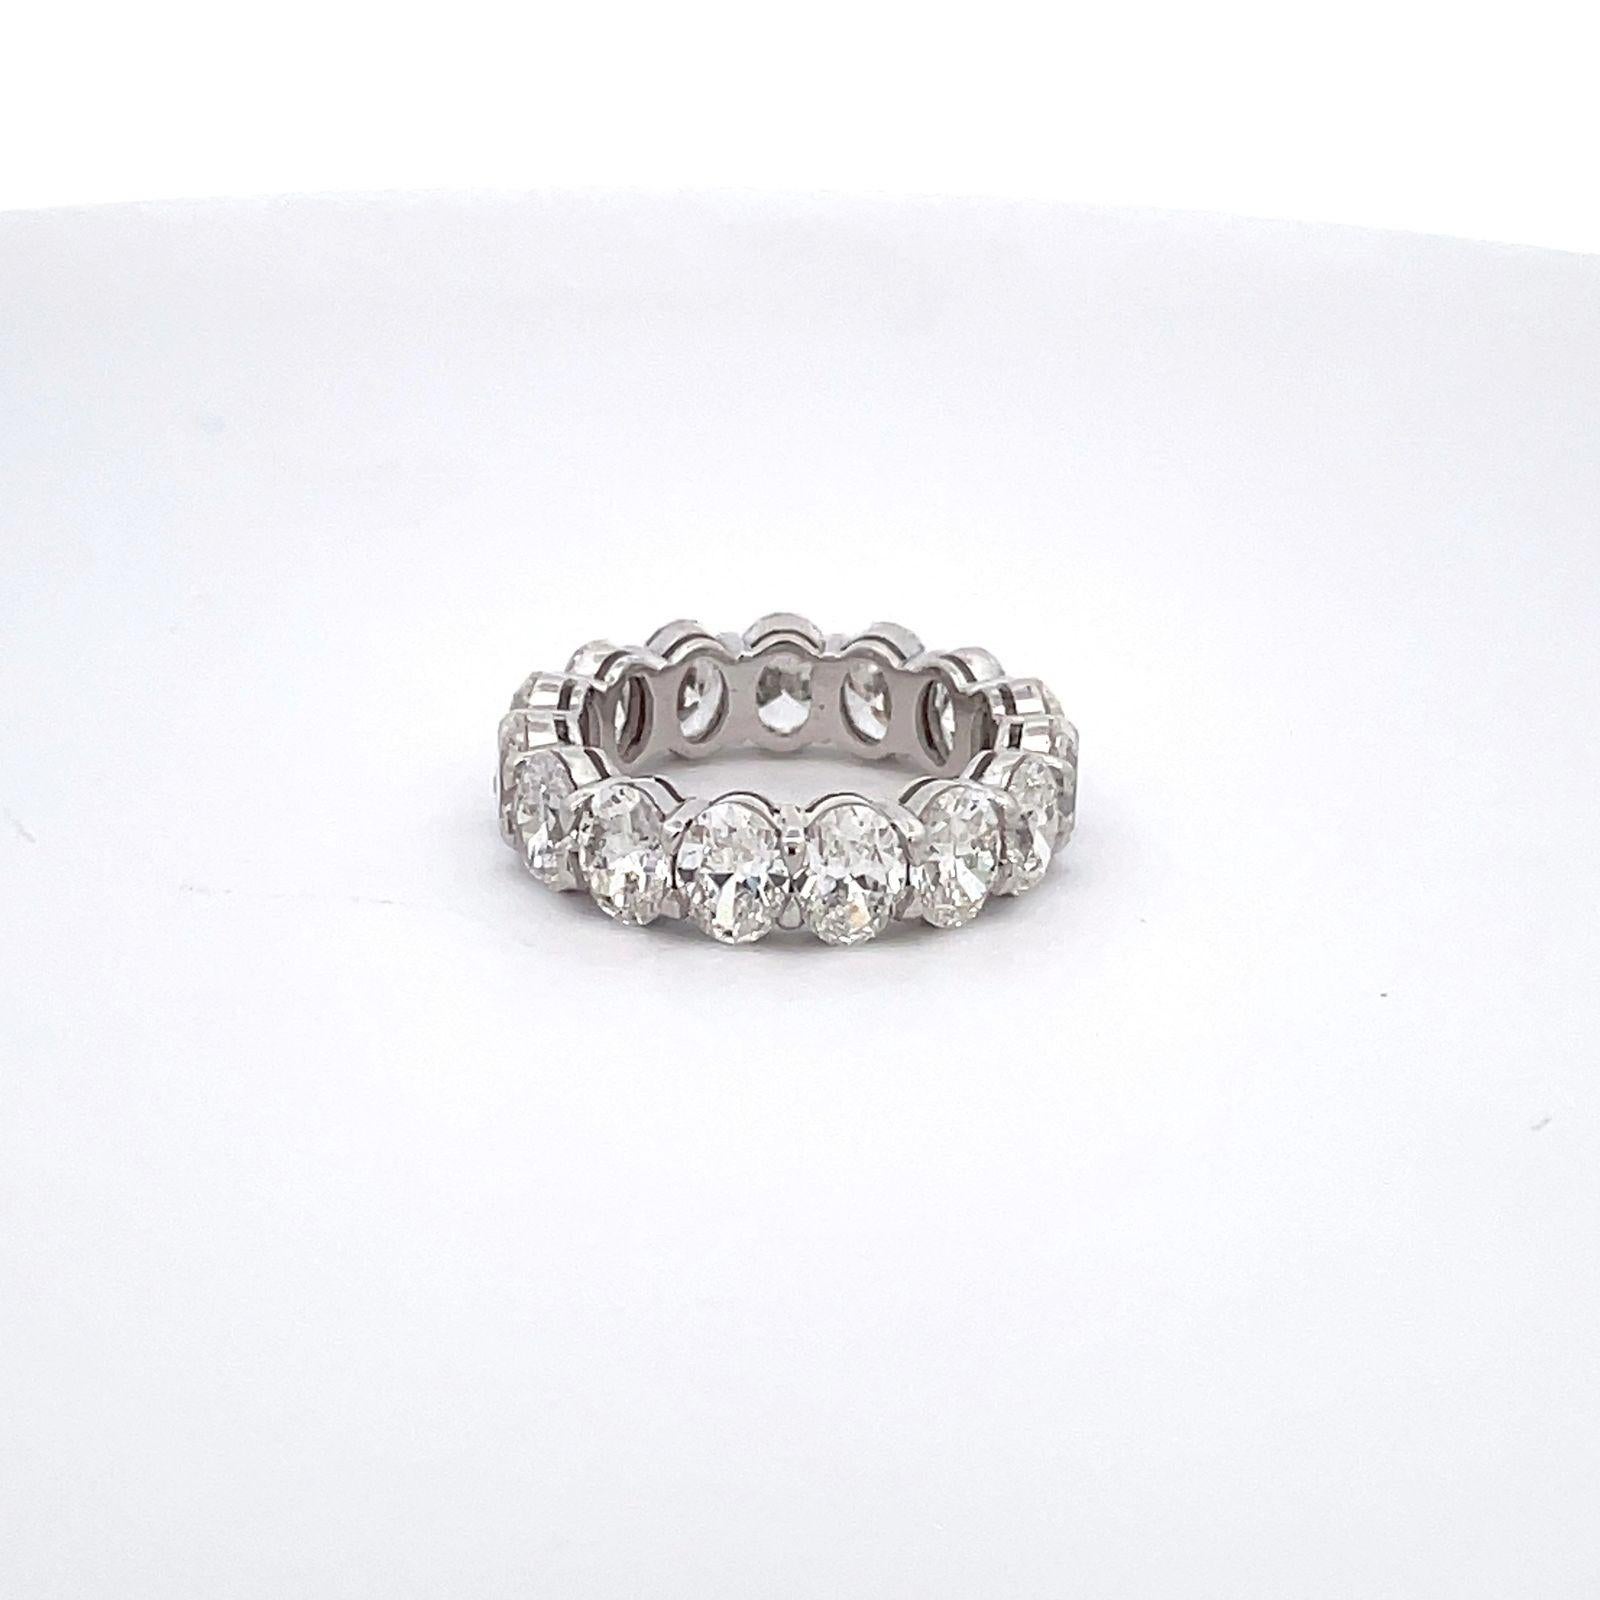 Eternity band in platinum with basket claw prong set GIA certified G-H/VS1-SI1 oval cut diamonds. D6.02ct.t.w.